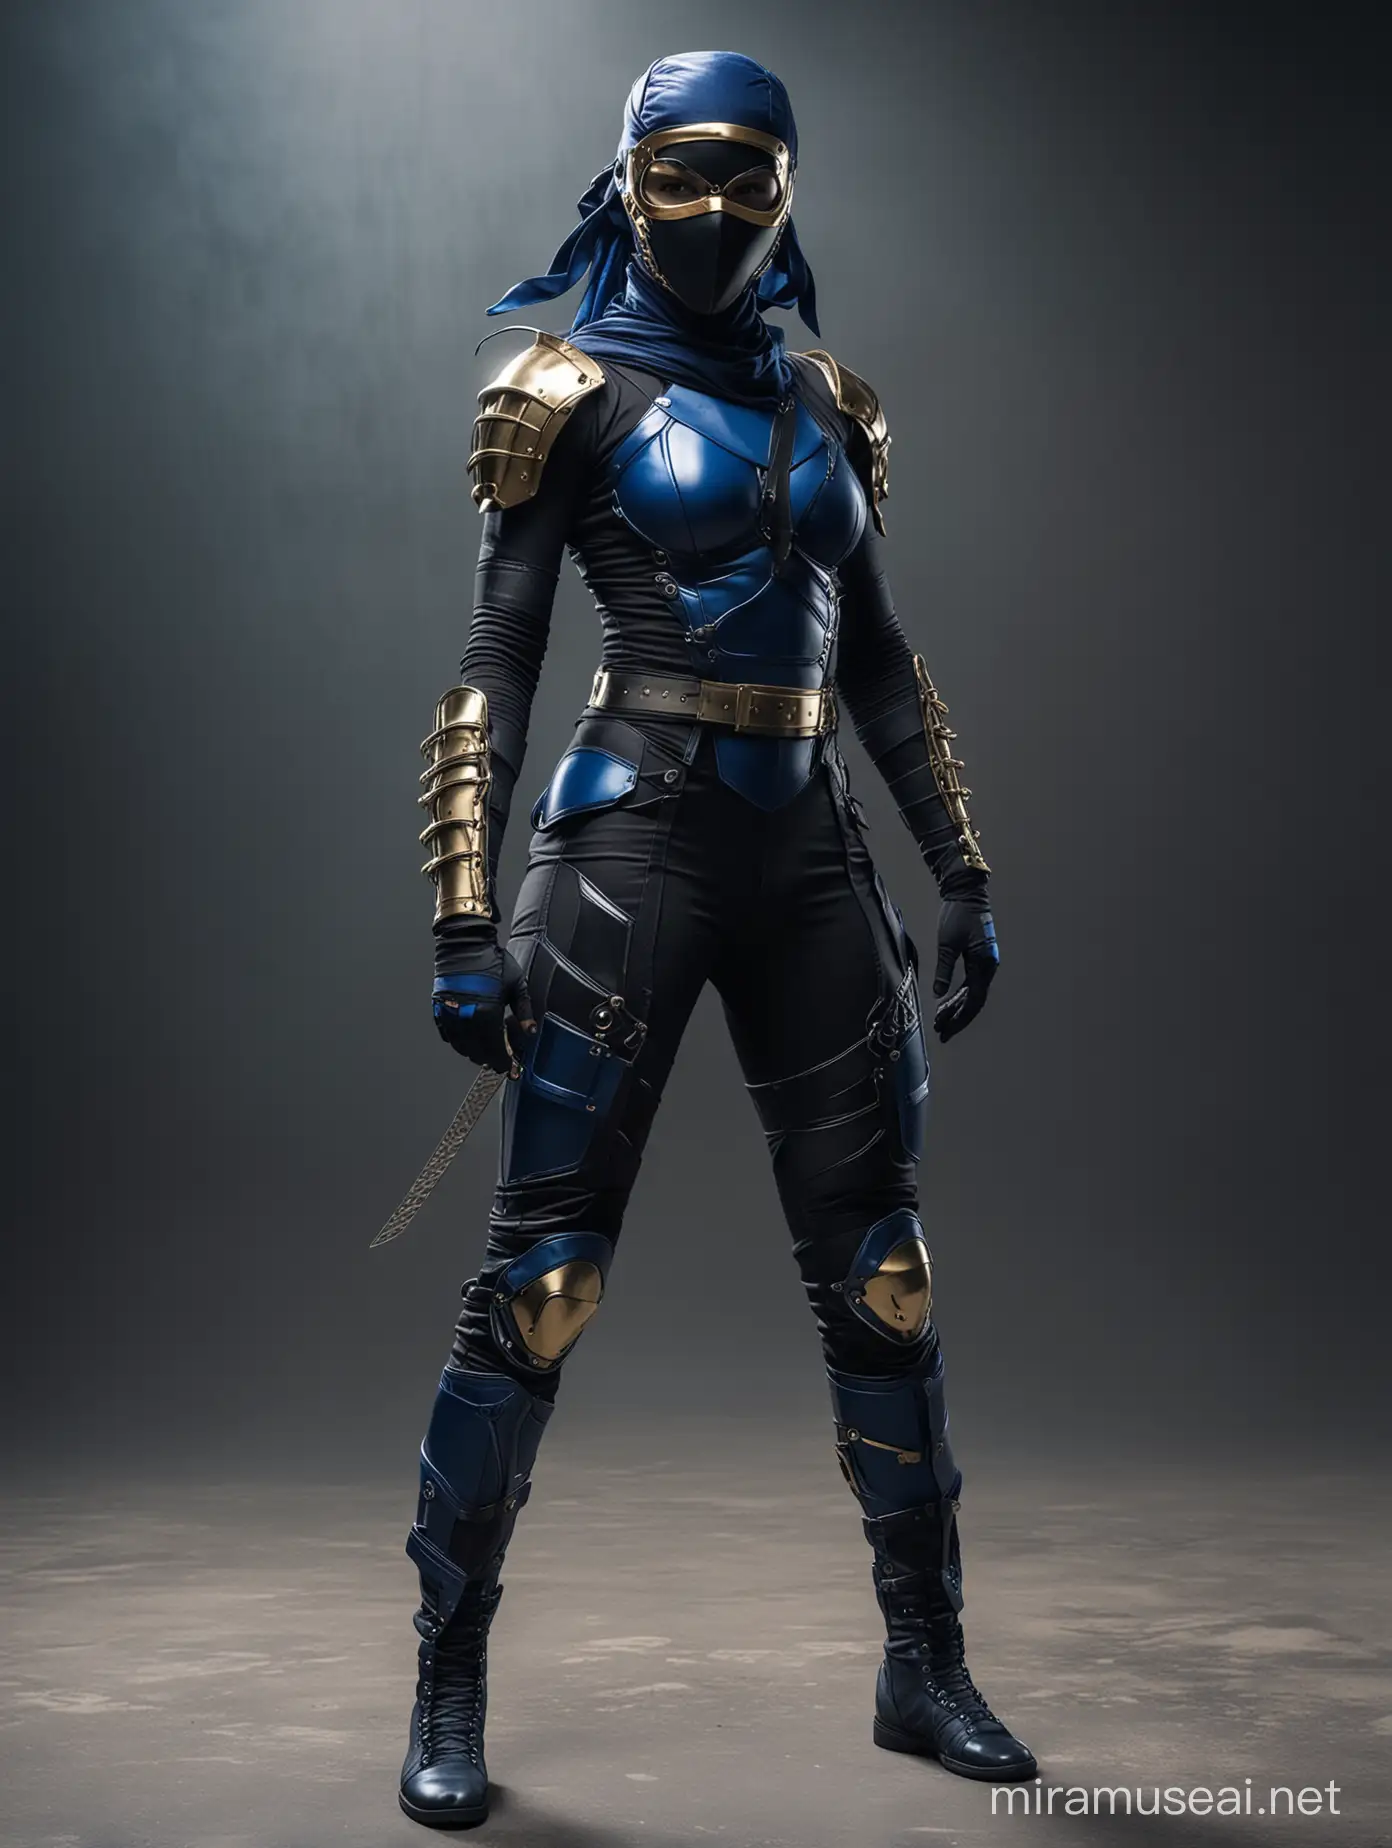 urban ninja, sleek, blue and black colour scheme, head to toe, gold accents, silver mesh on arms, mask, cinematic promo shot, full body